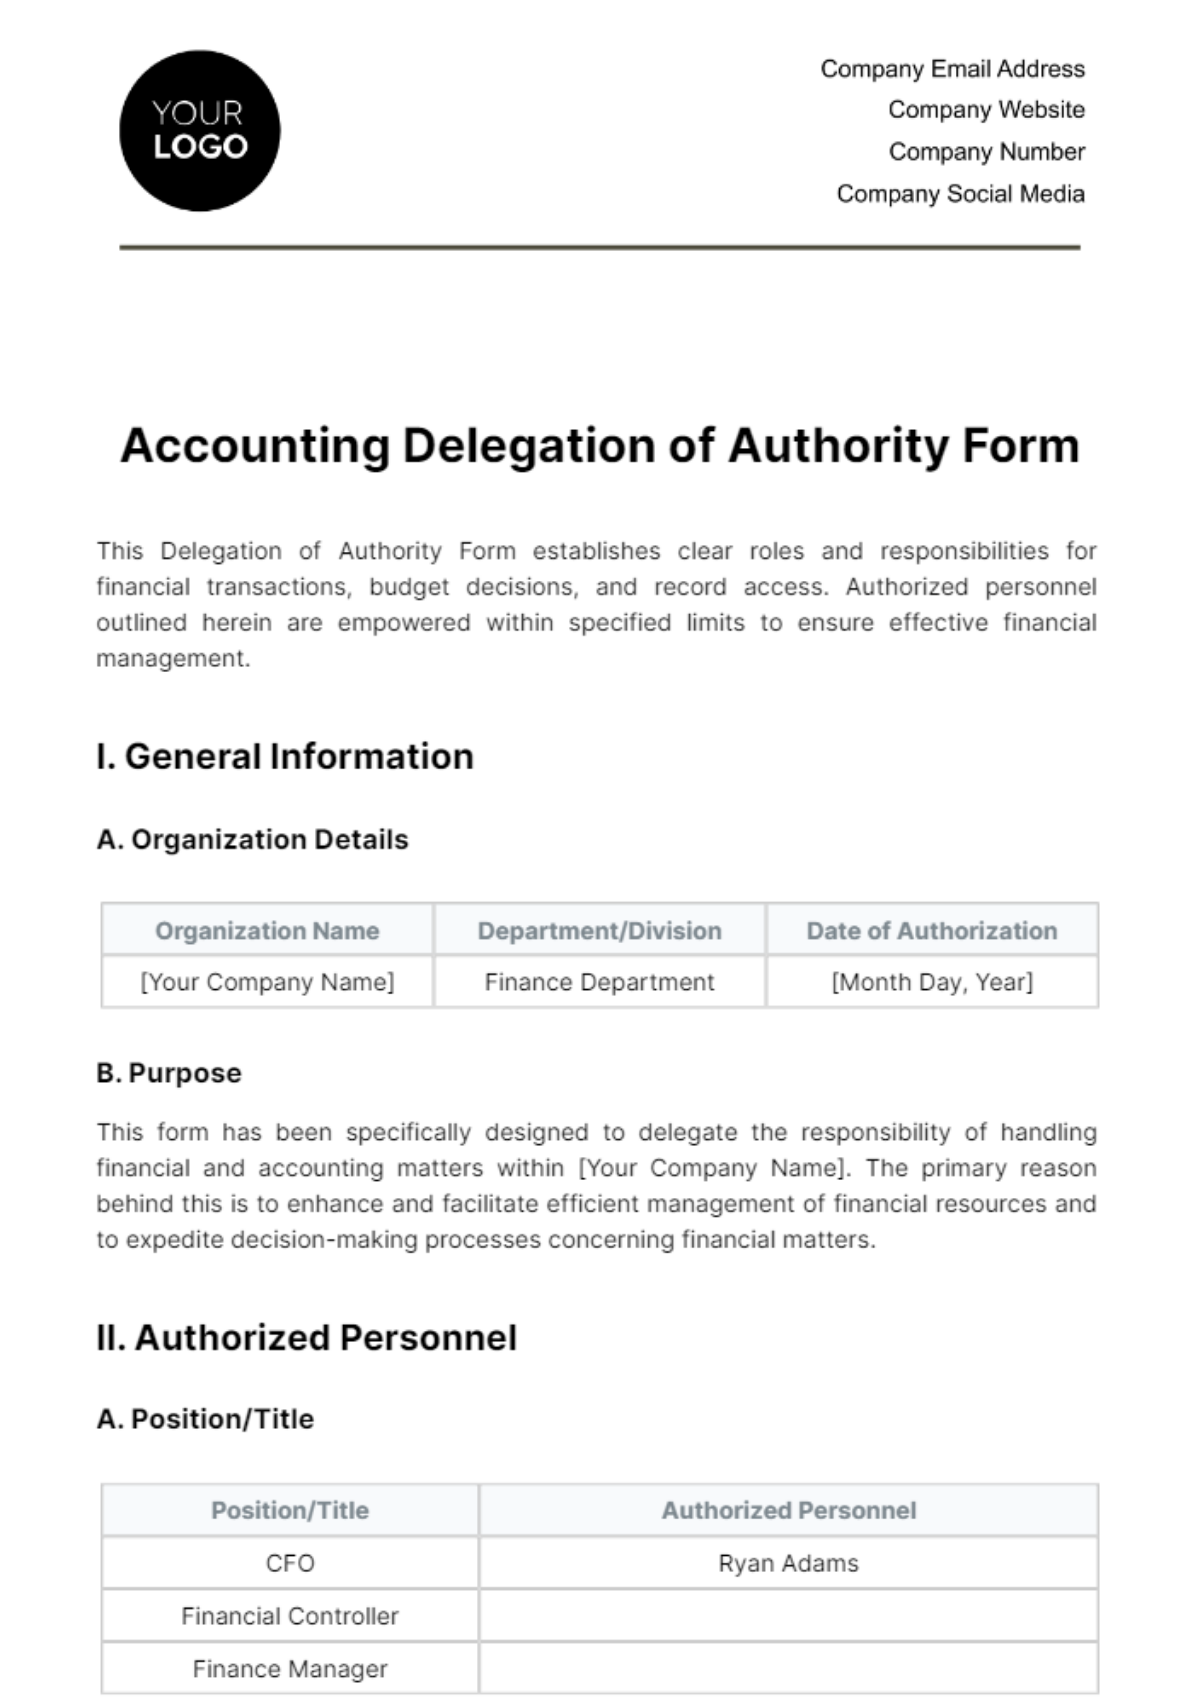 Free Accounting Delegation of Authority Form Template